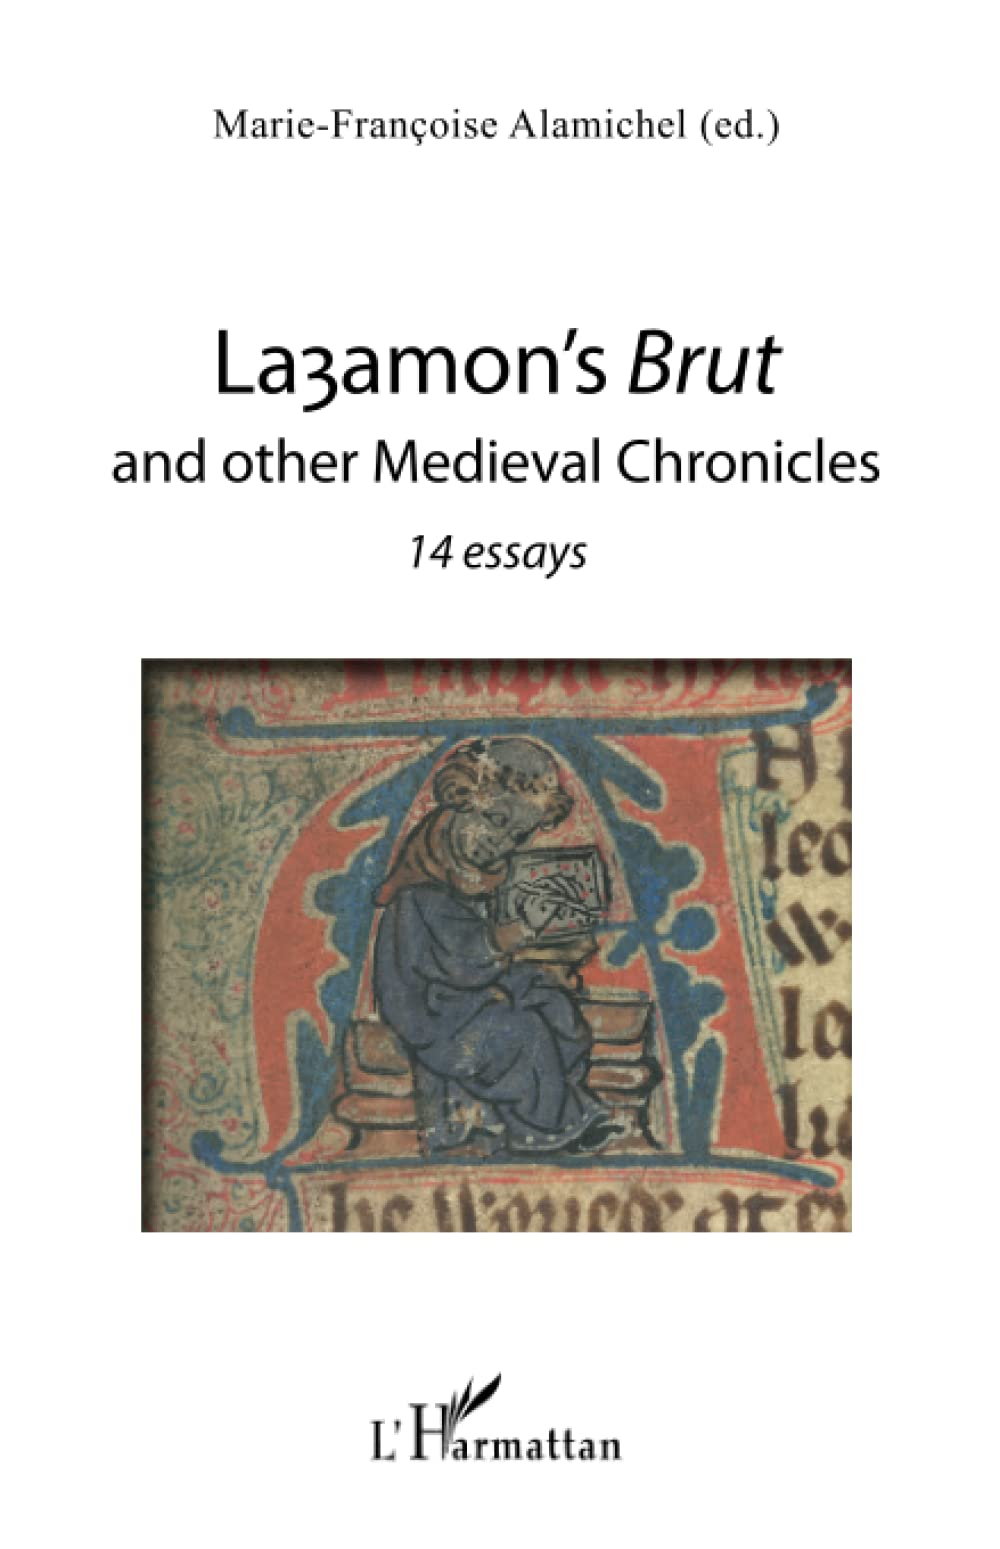 Layamon's Brut and other Medieval Chronicles: 14 essays